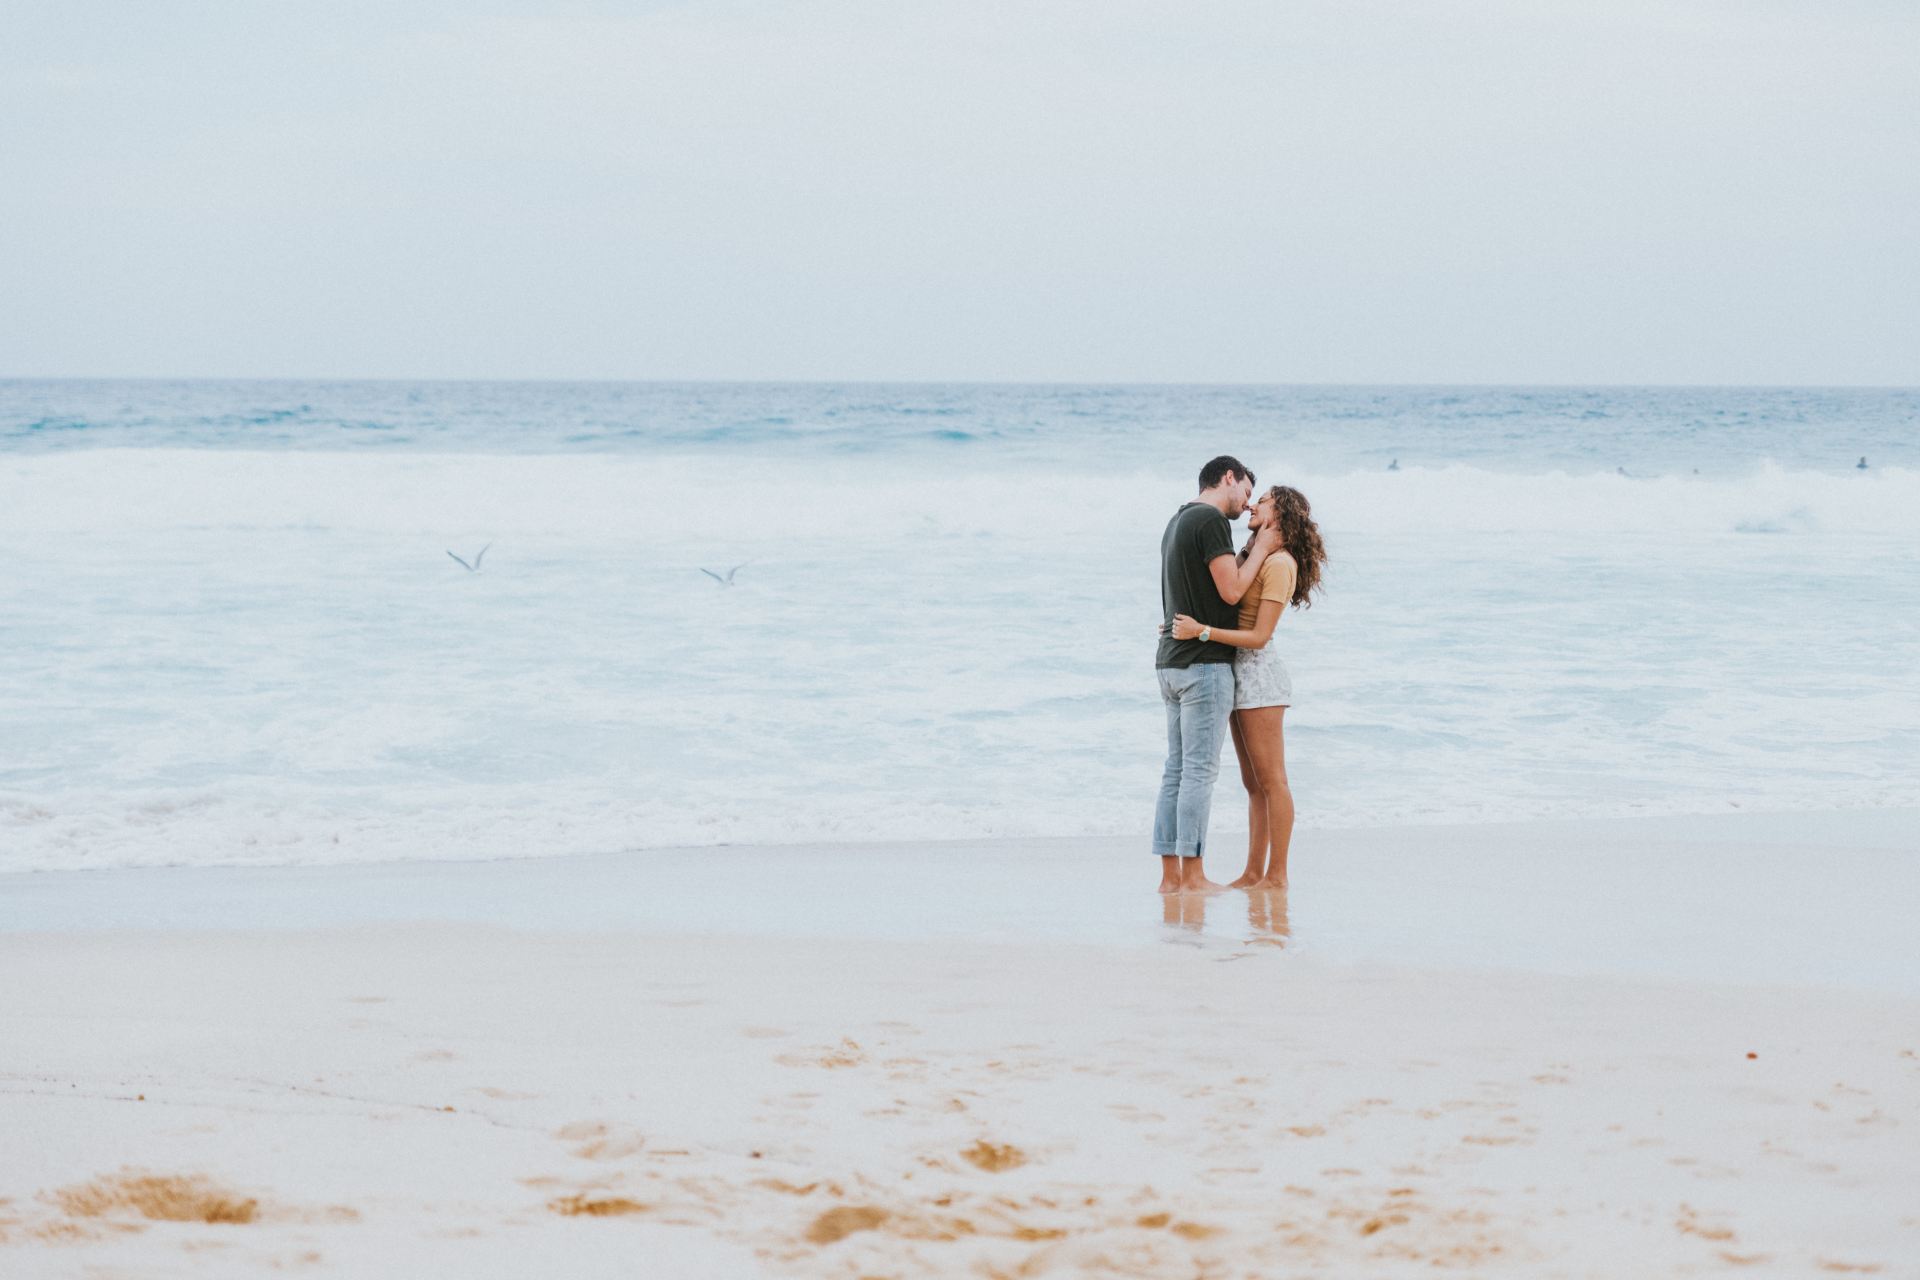 35 Relationship Fears That Might Be Holding You Back From Finding True Love